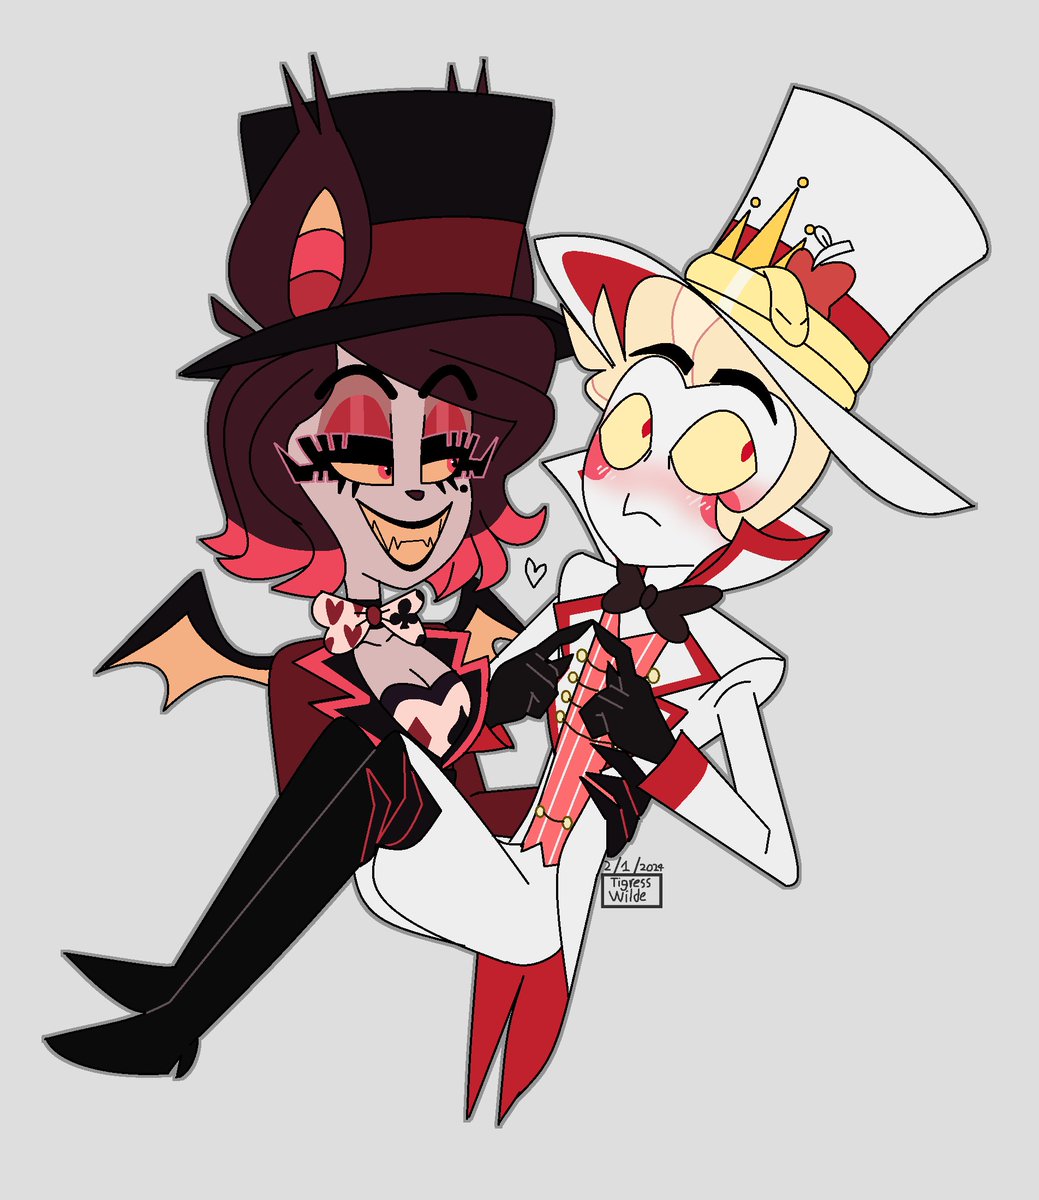 I wanna draw one of my ocs with Lucifer AAA 🦇🍎 and myess she got a redesign - - - #HazbinHotel #HazbinHotelOC #HazbinHotelLucifer #LuciferHazbinHotel